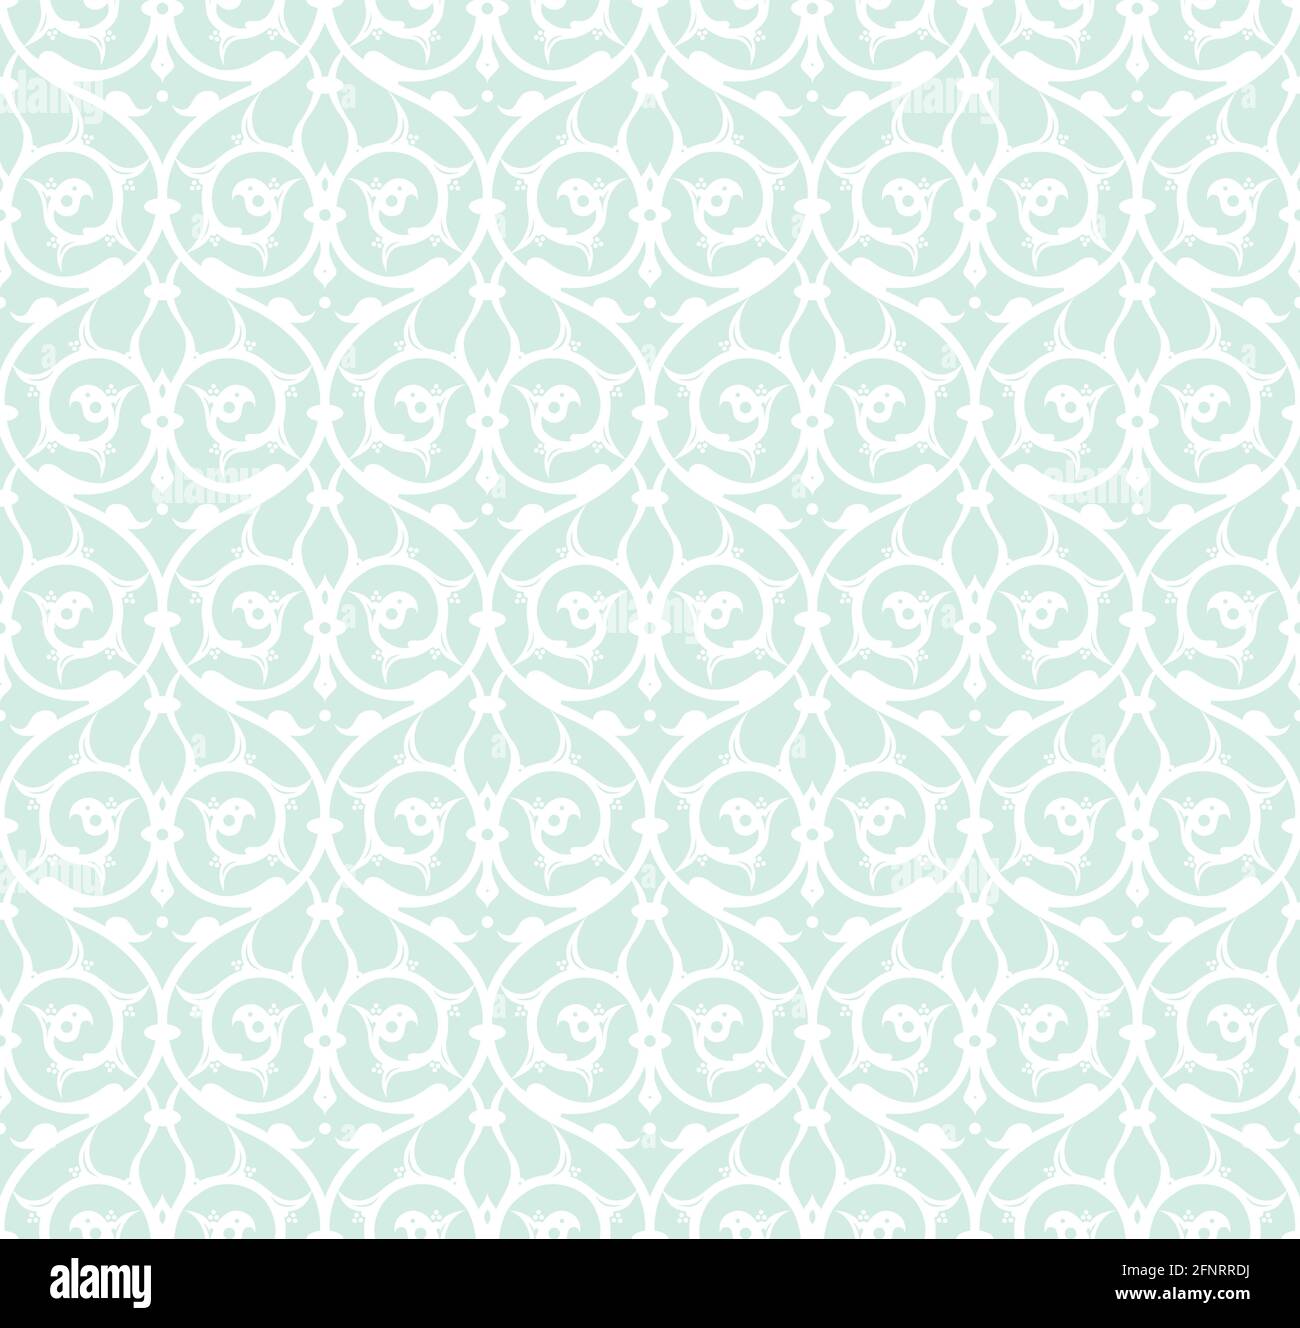 Floral seamless pattern design with Ottoman Turkish style ornaments, repeating background for web and print Stock Vector